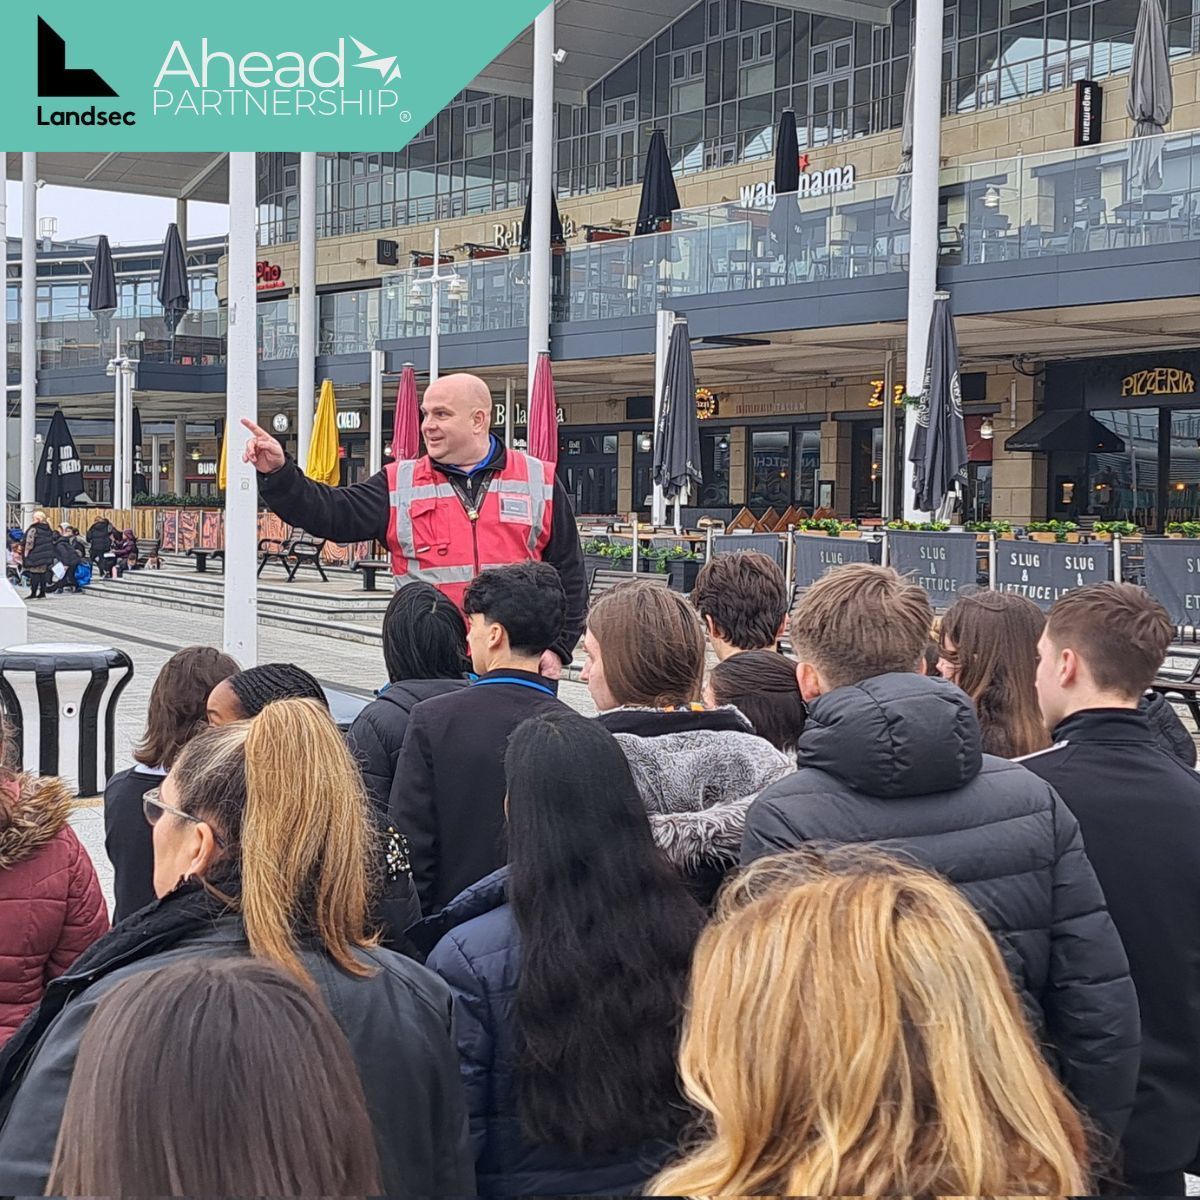 We're delighted to expand our partnership with @Landsec over the UK, from @Buch_galleries in Glasgow to @Gunwharfquays in Portsmouth. We now have programmes in Scotland, Wales & England engaging young people in the #FutureOfRetail Find out more: buff.ly/4atFAqP